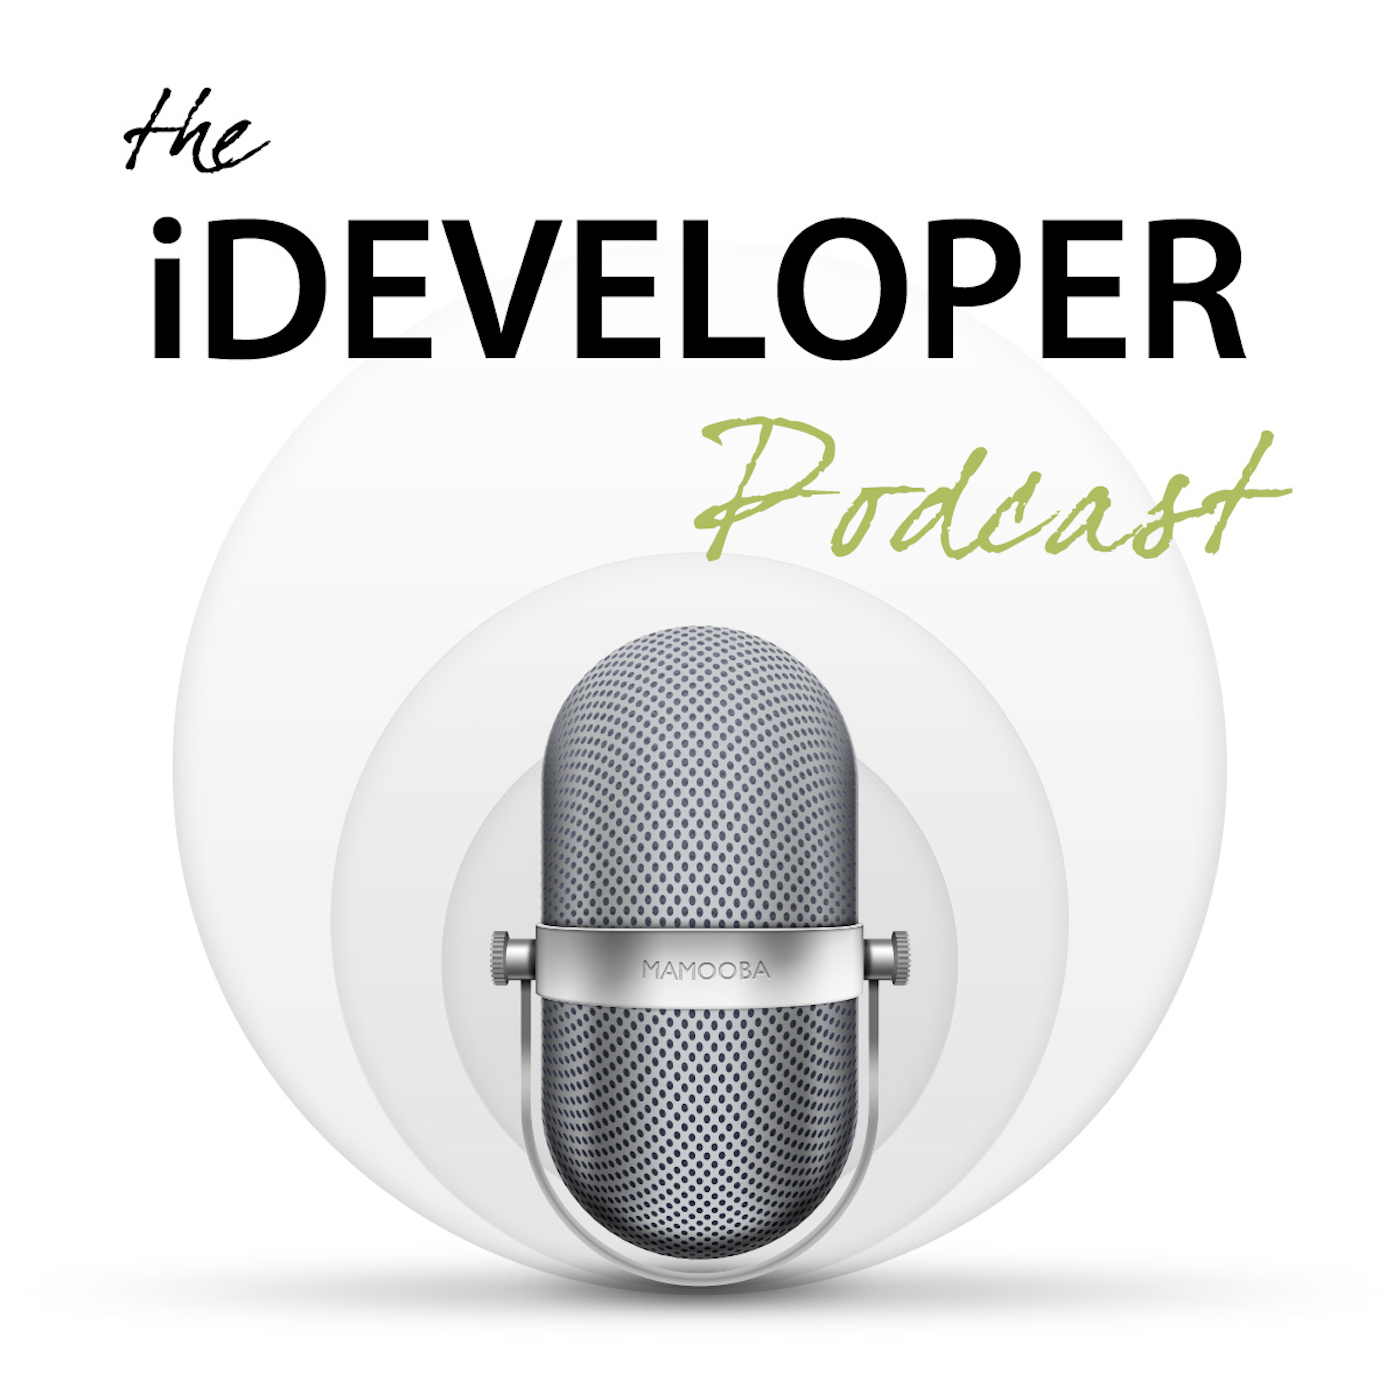 The iDeveloper Podcast 097: Stagnation Or Stability, Does It Even Matter?